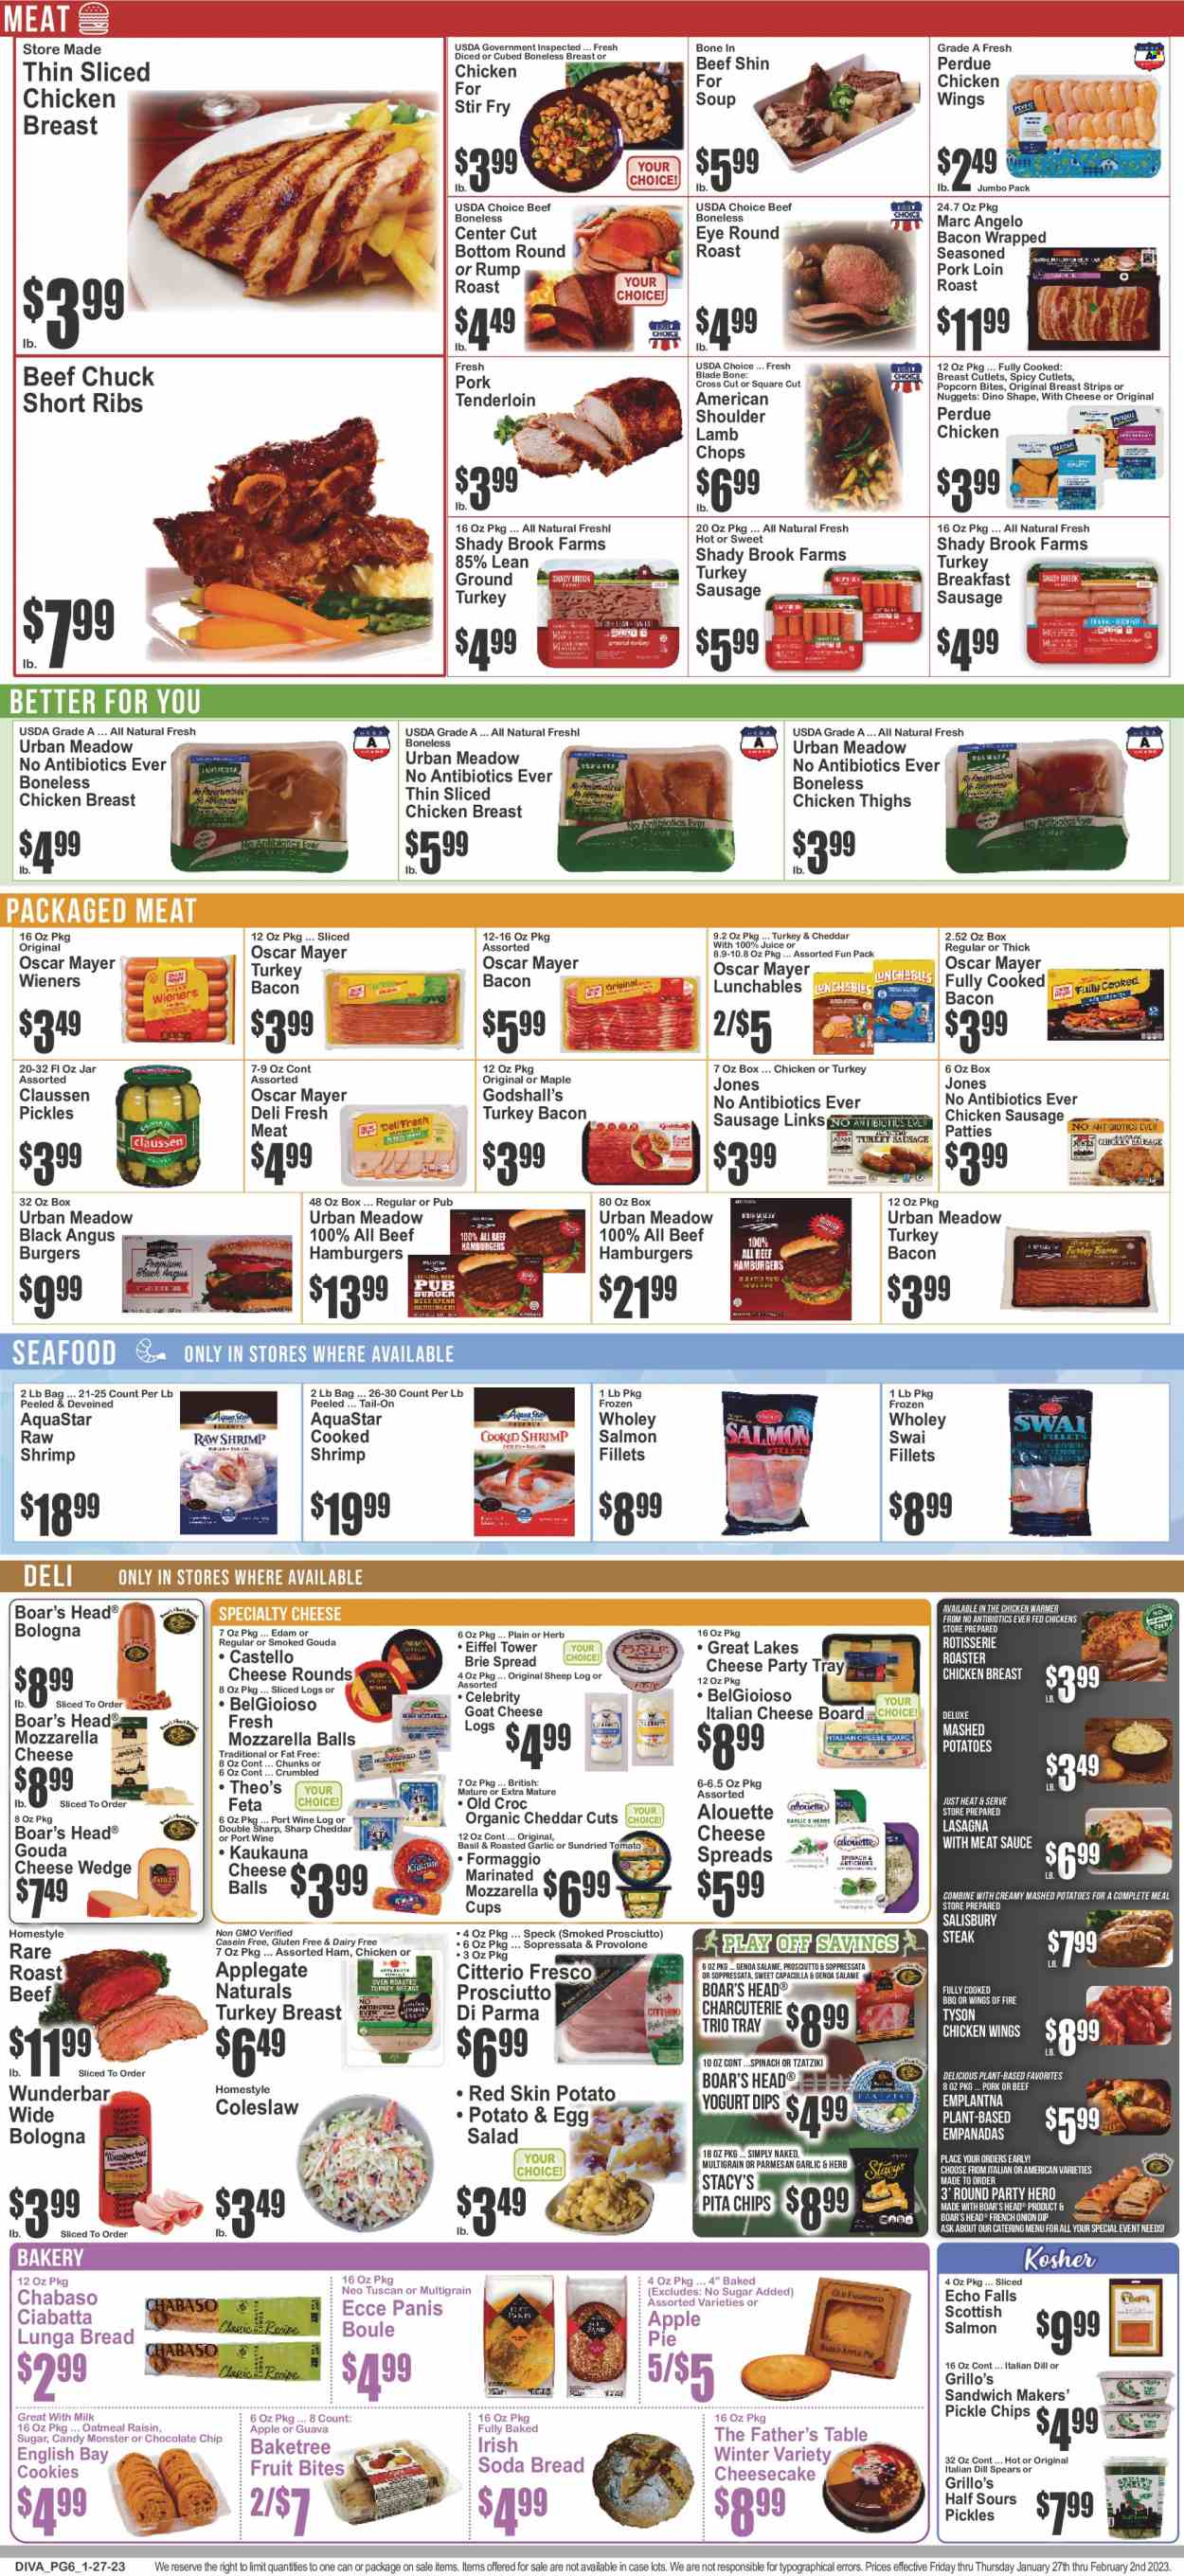 thumbnail - Key Food Flyer - 01/27/2023 - 02/02/2023 - Sales products - bread, ciabatta, pie, soda bread, Father's Table, apple pie, cheesecake, salad, guava, salmon, salmon fillet, seafood, shrimps, swai fillet, coleslaw, mashed potatoes, soup, nuggets, hamburger, sauce, lasagna meal, Perdue®, Lunchables, empanadas, bacon, soppressata, turkey bacon, ham, prosciutto, bologna sausage, Oscar Mayer, sausage, chicken sausage, tzatziki, edam cheese, goat cheese, gouda, mozzarella, parmesan, brie, feta, Provolone, yoghurt, milk, eggs, dip, chicken wings, strips, cookies, popcorn, pita chips, oatmeal, pickles, dill, juice, Monster, port wine, ground turkey, turkey breast, chicken breasts, chicken thighs, beef meat, steak, round roast, roast beef, ribs, pork loin, pork meat, pork tenderloin, lamb chops, lamb meat, cup, cheese board. Page 6.